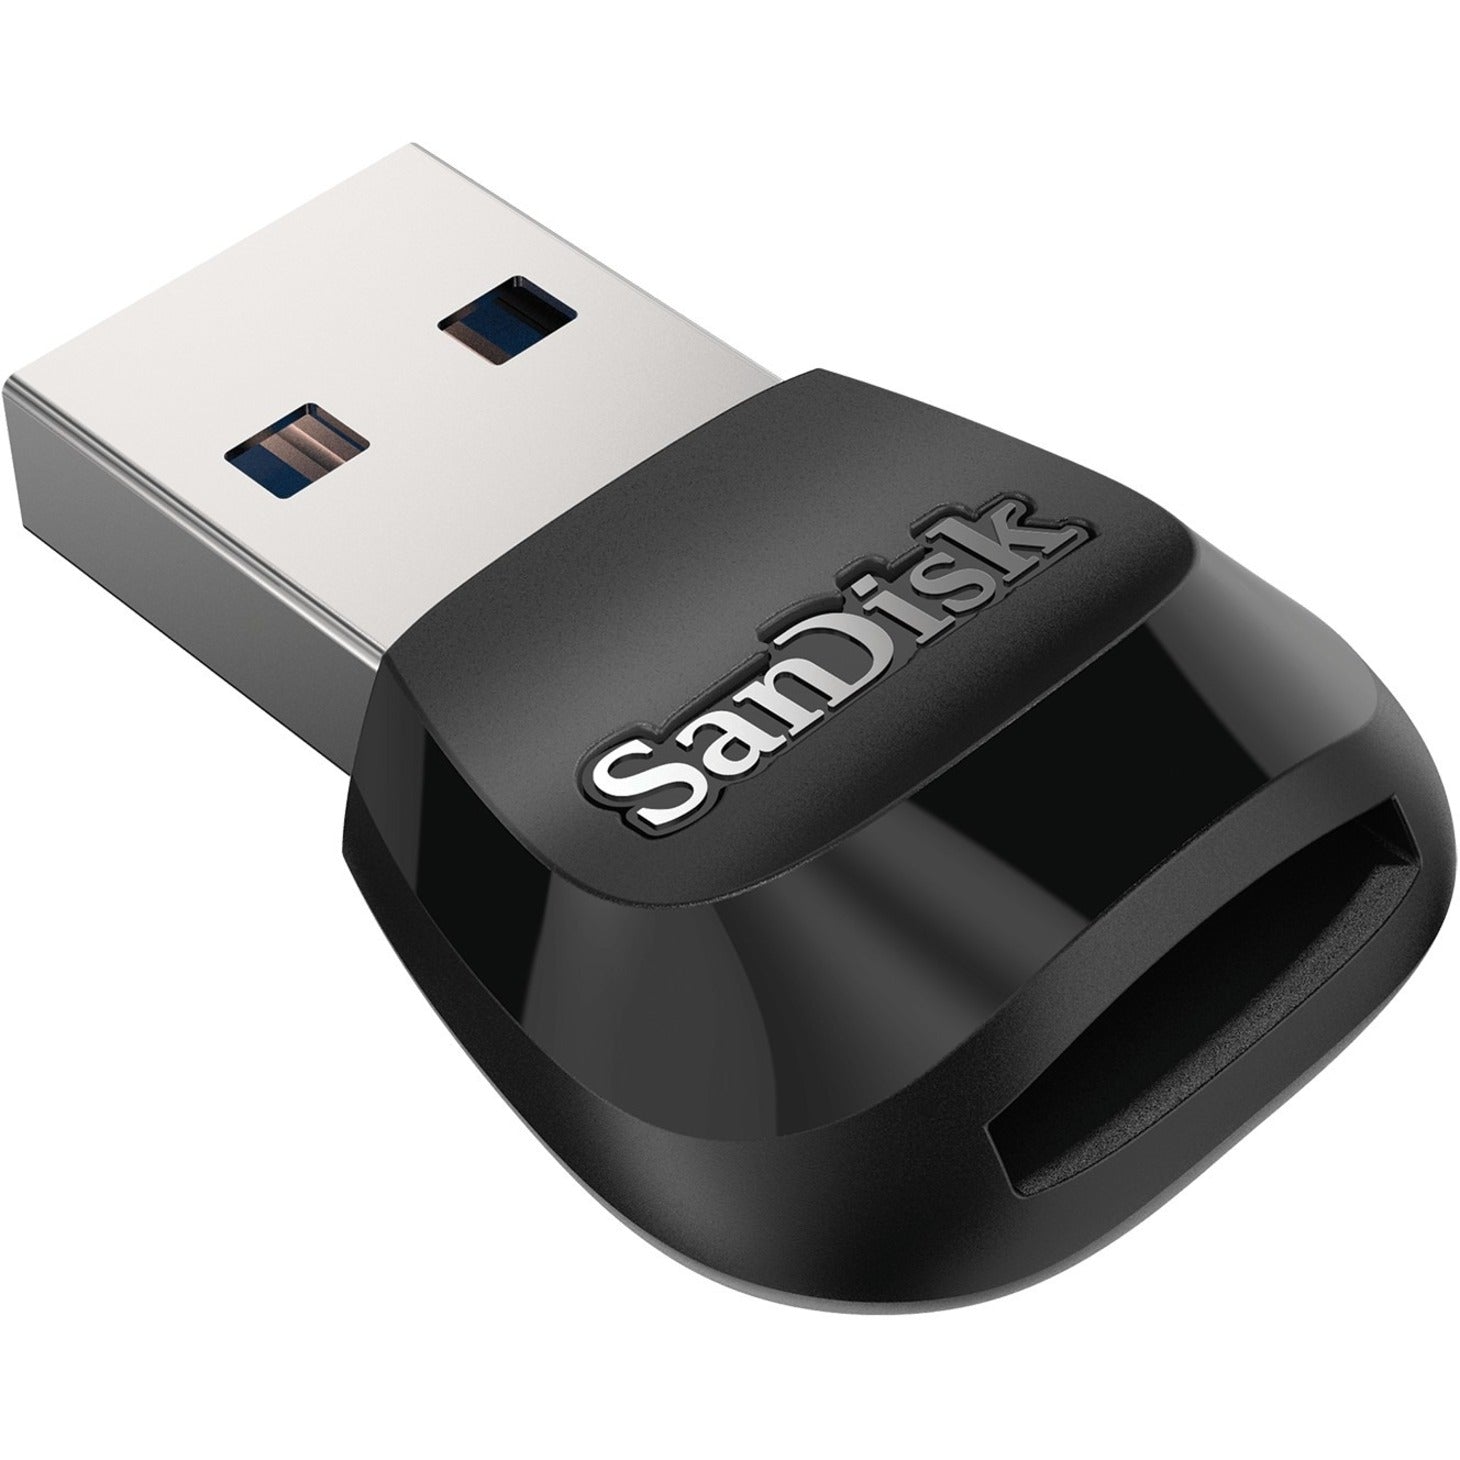 SanDisk SDDR-B531-AN6NN MobileMate USB 3.0 Card Reader, High-Speed Data Transfer and Easy File Management